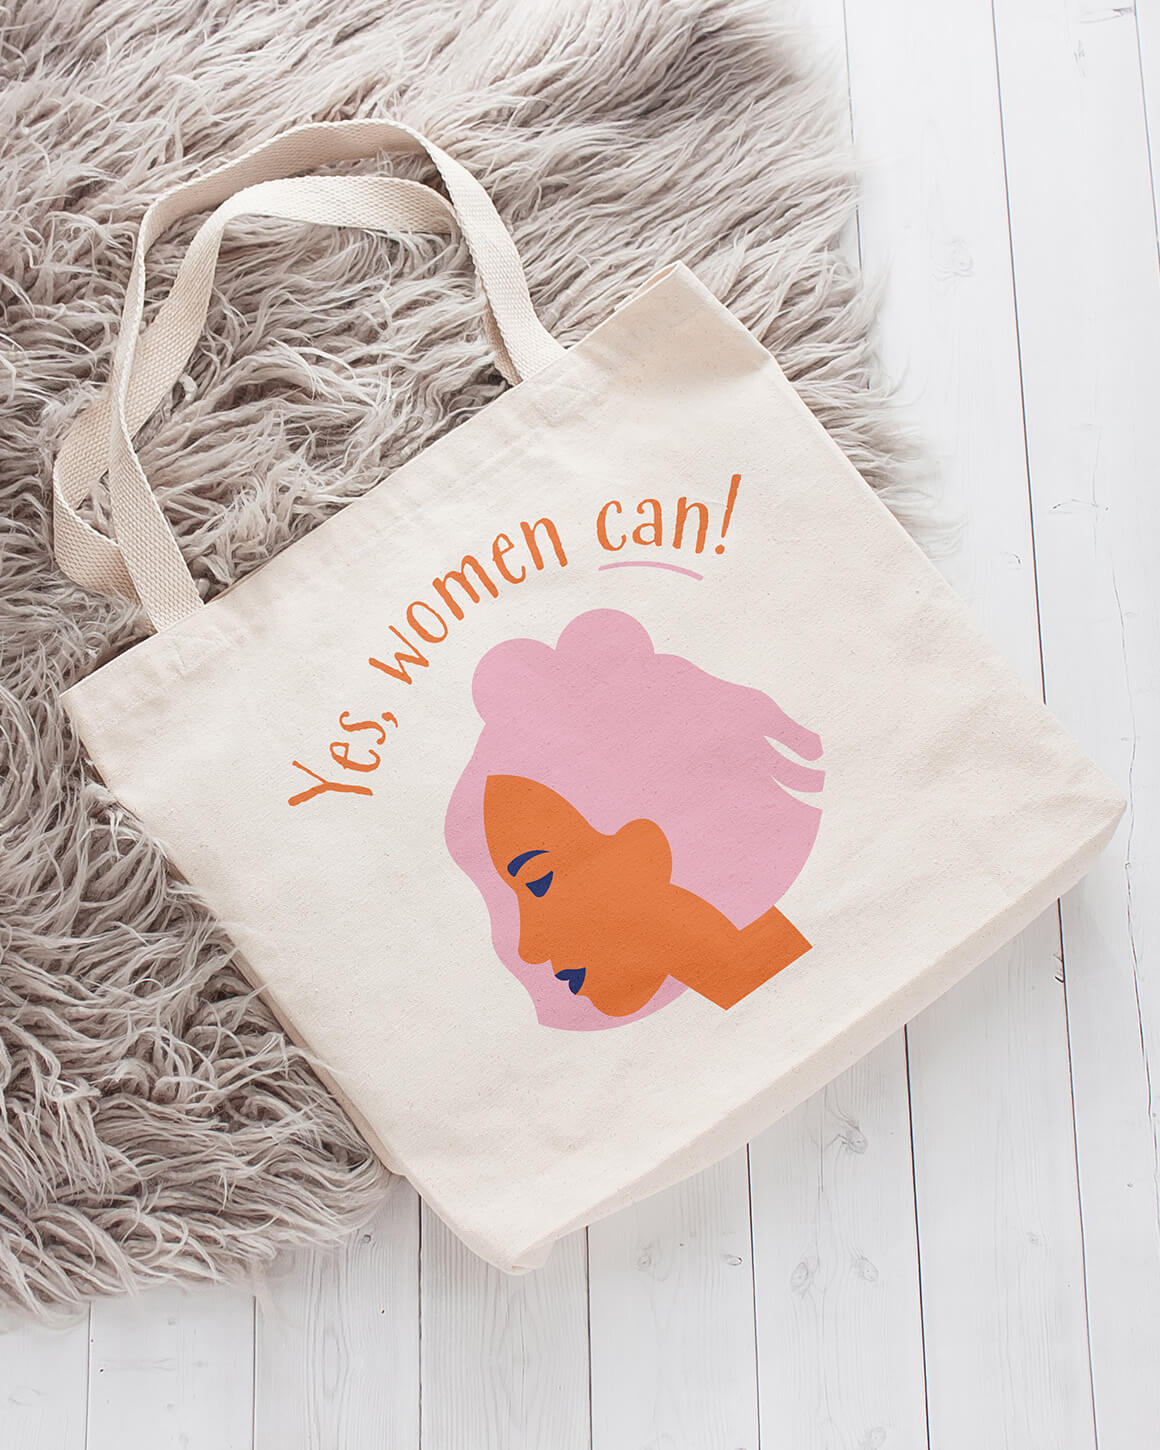 Yes women can two color design on cotton tote bag